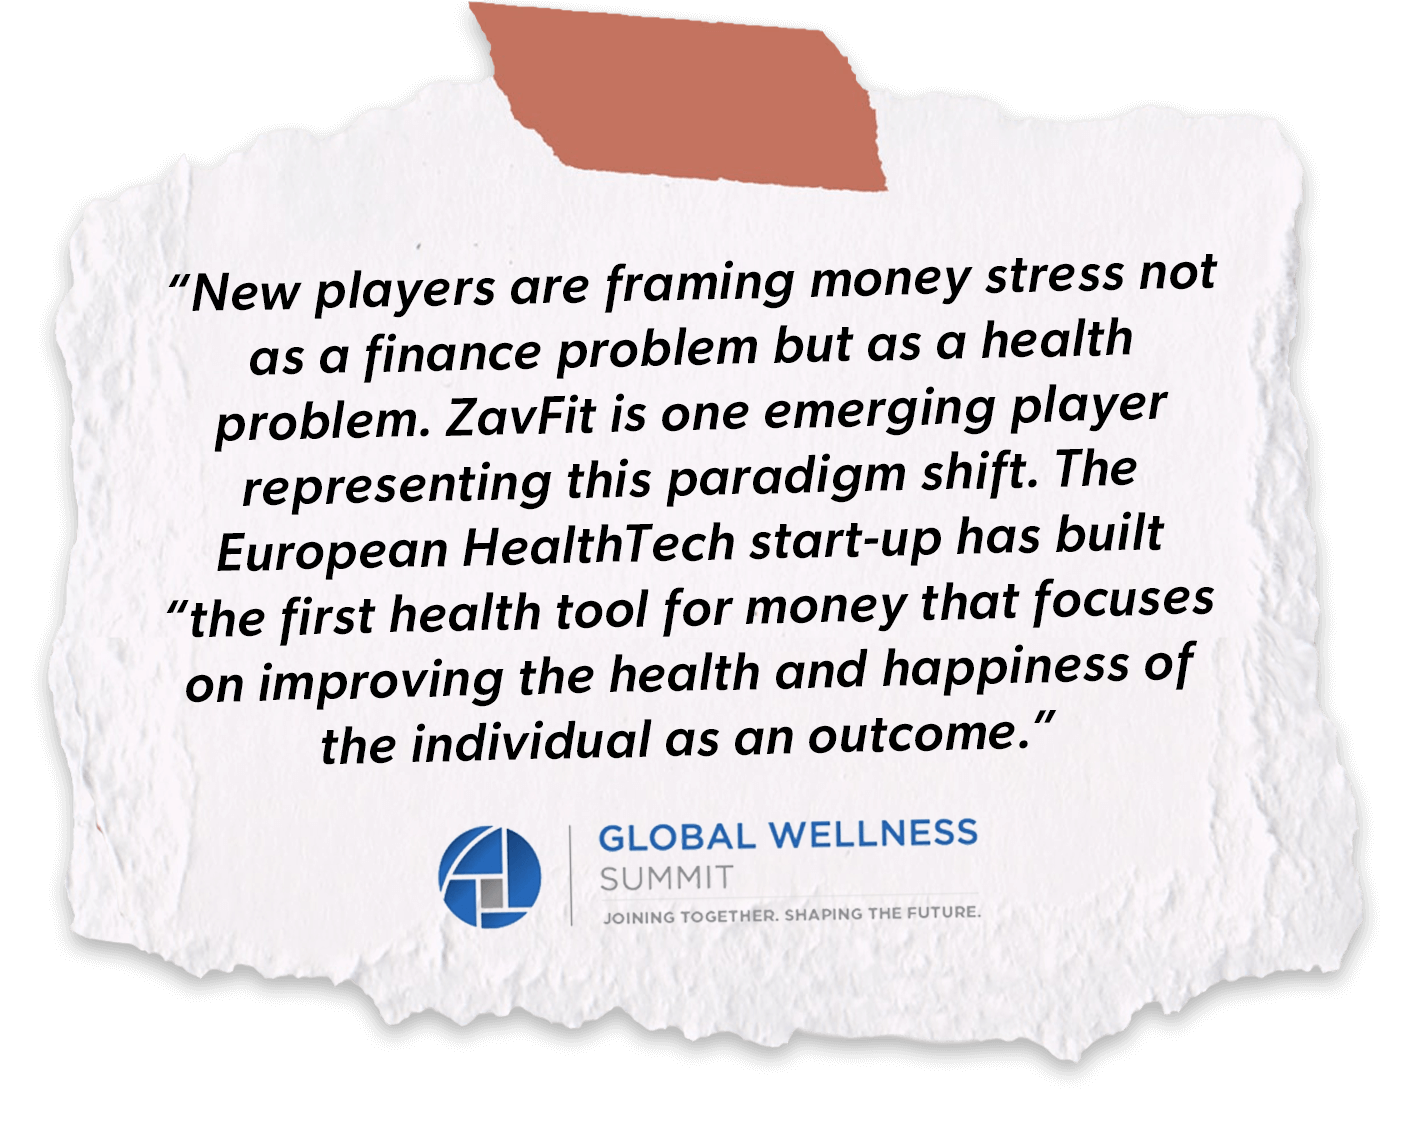 “New players are framing money stress not as a finance problem but as a health problem. ZavFit is one emerging player representing this paradigm shift. The European HealthTech start-up has built “the first health tool for money that focuses on improving the health and happiness of the individual as an outcome.”